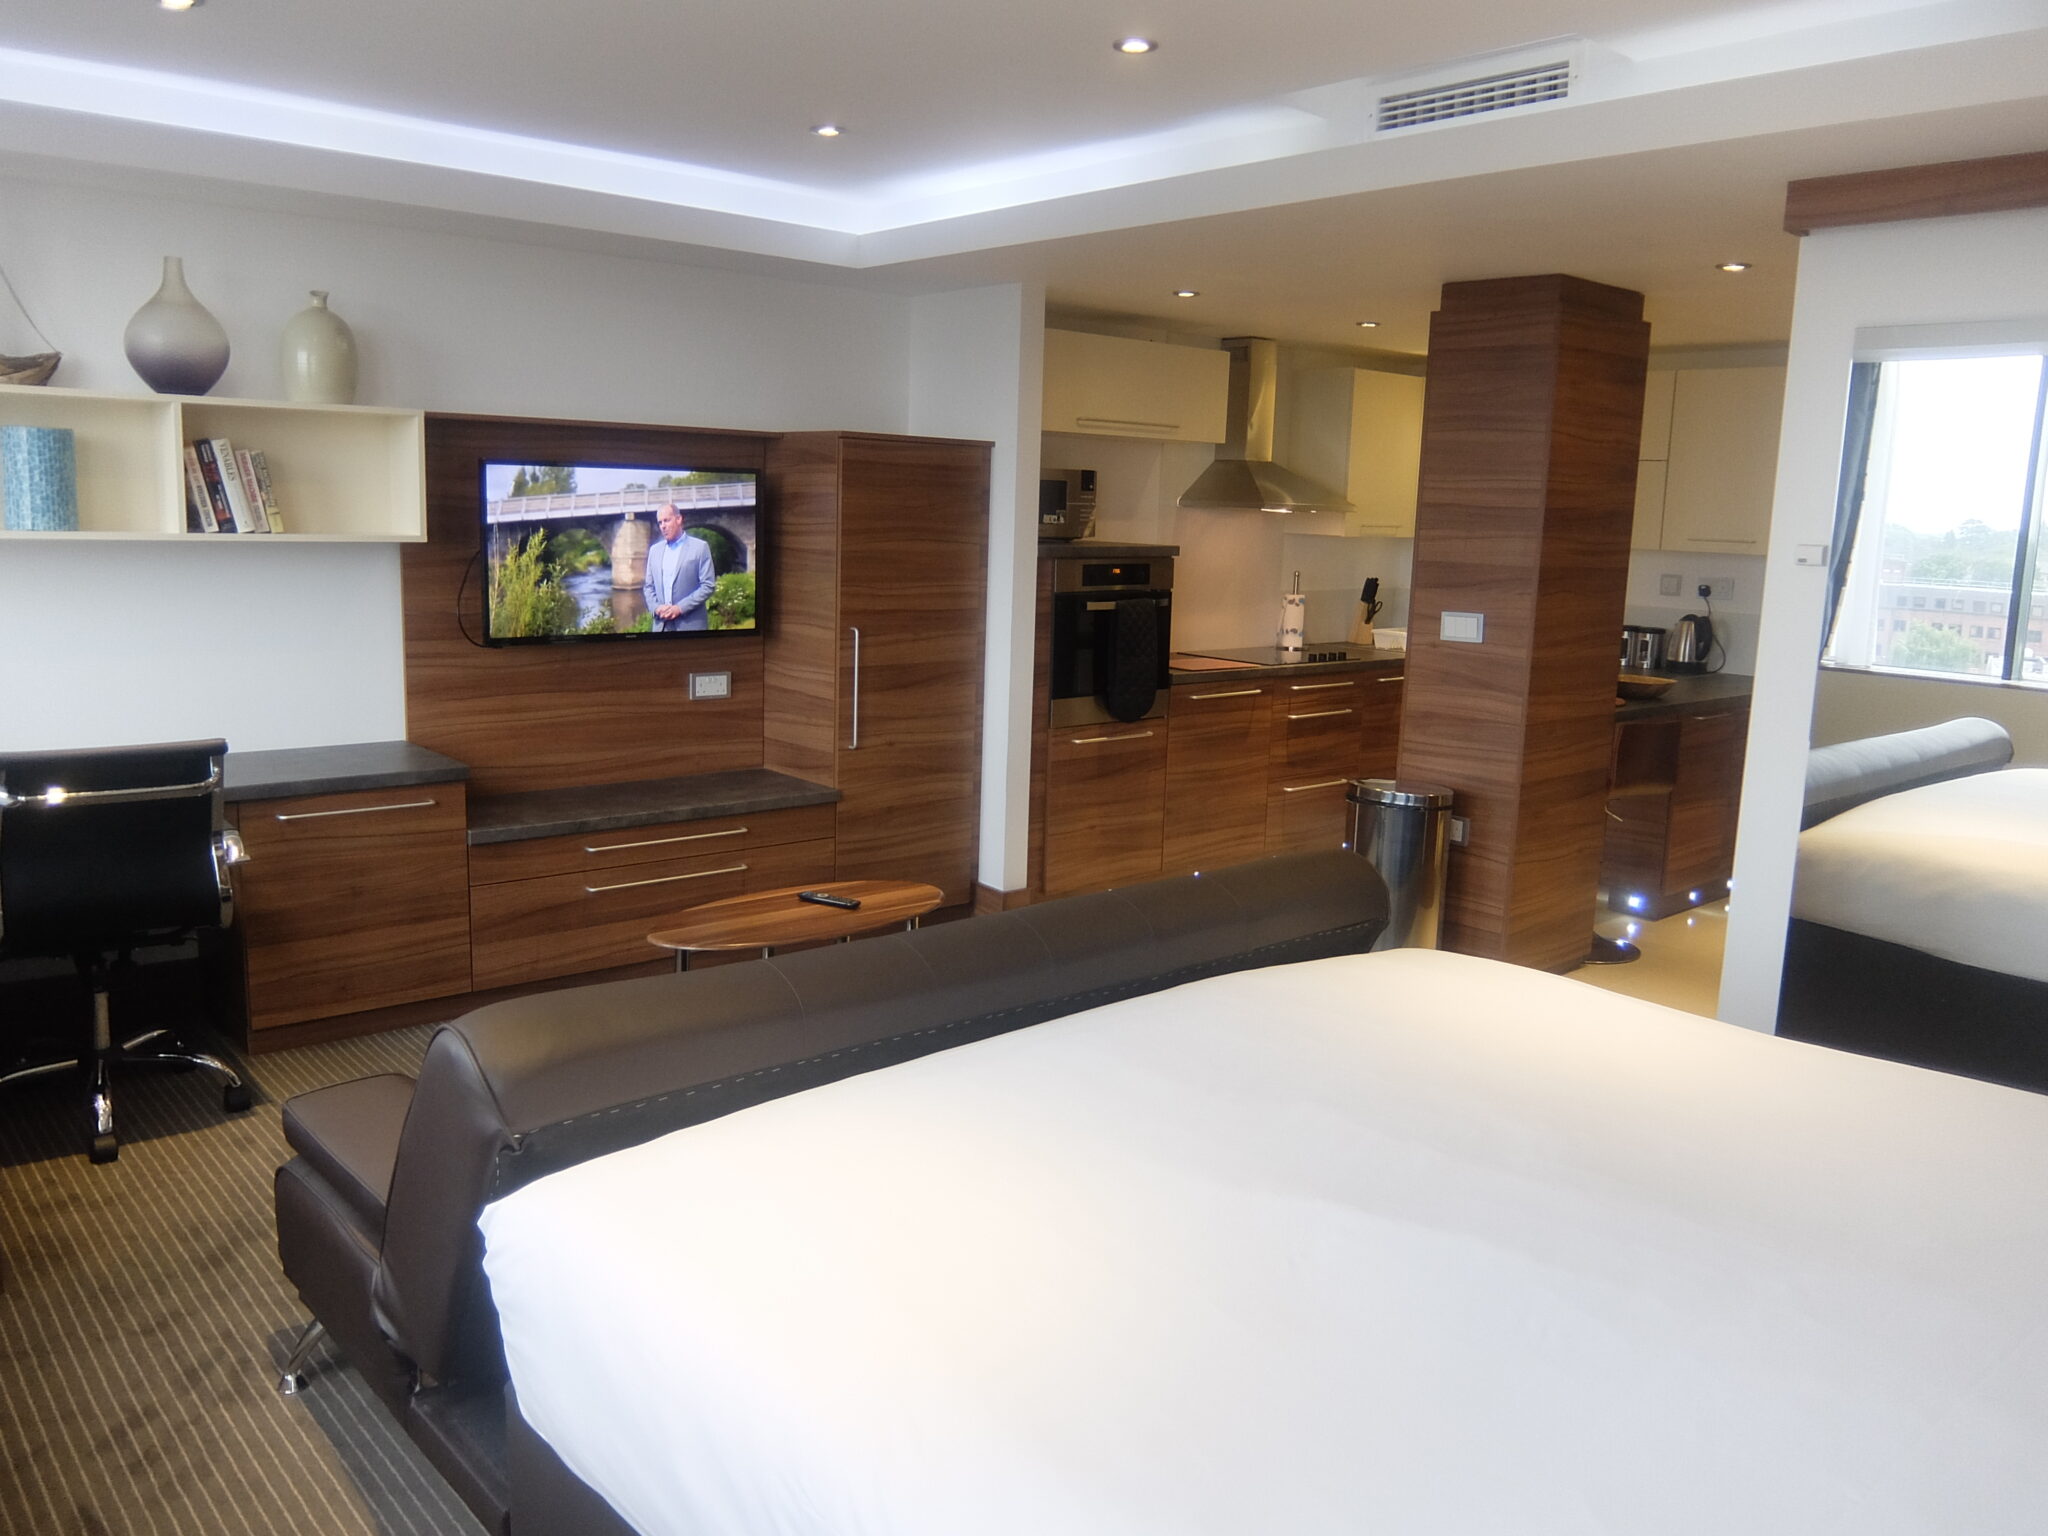 Watford Serviced Apartments - West London Serviced Apartments - Watford | Urban Stay